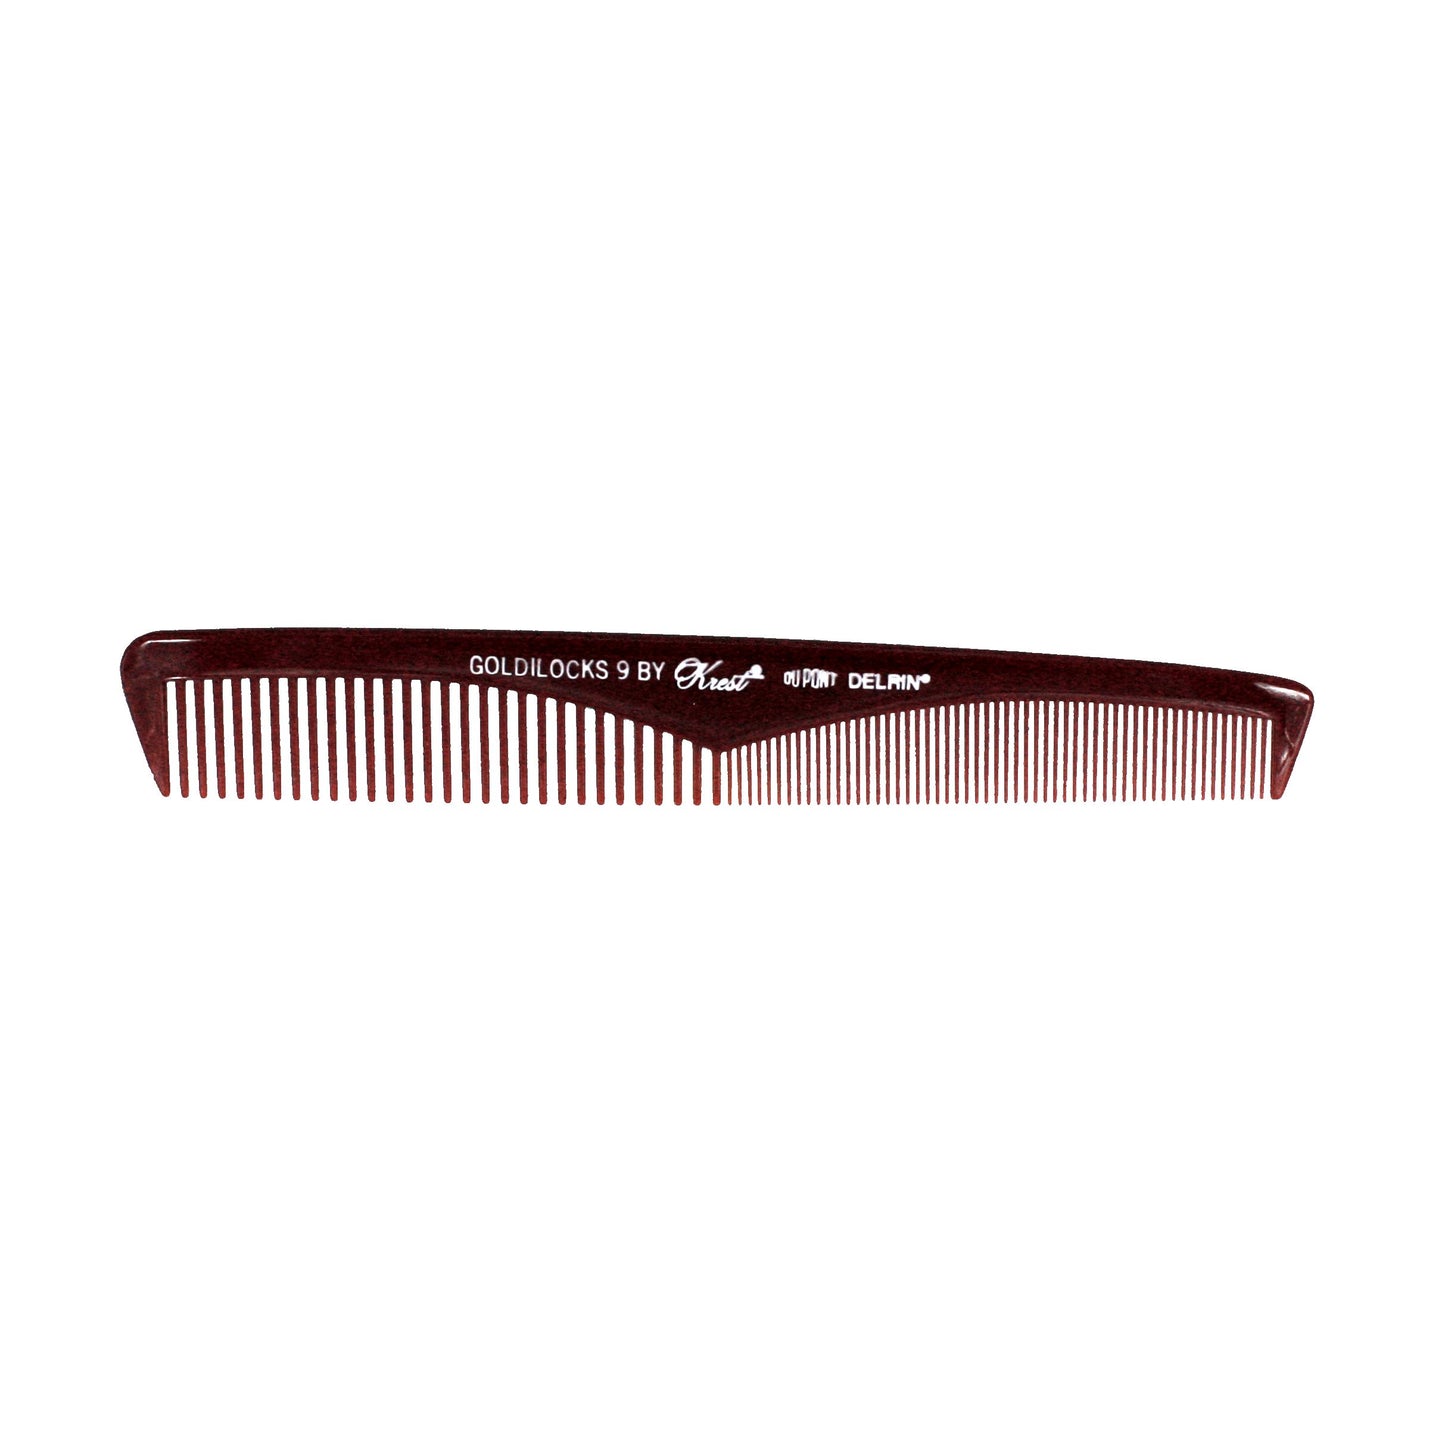 7.5in Extra Thin Taper/Clipper Comb - CLOSEOUT, LIMITED STOCK AVAILABLE